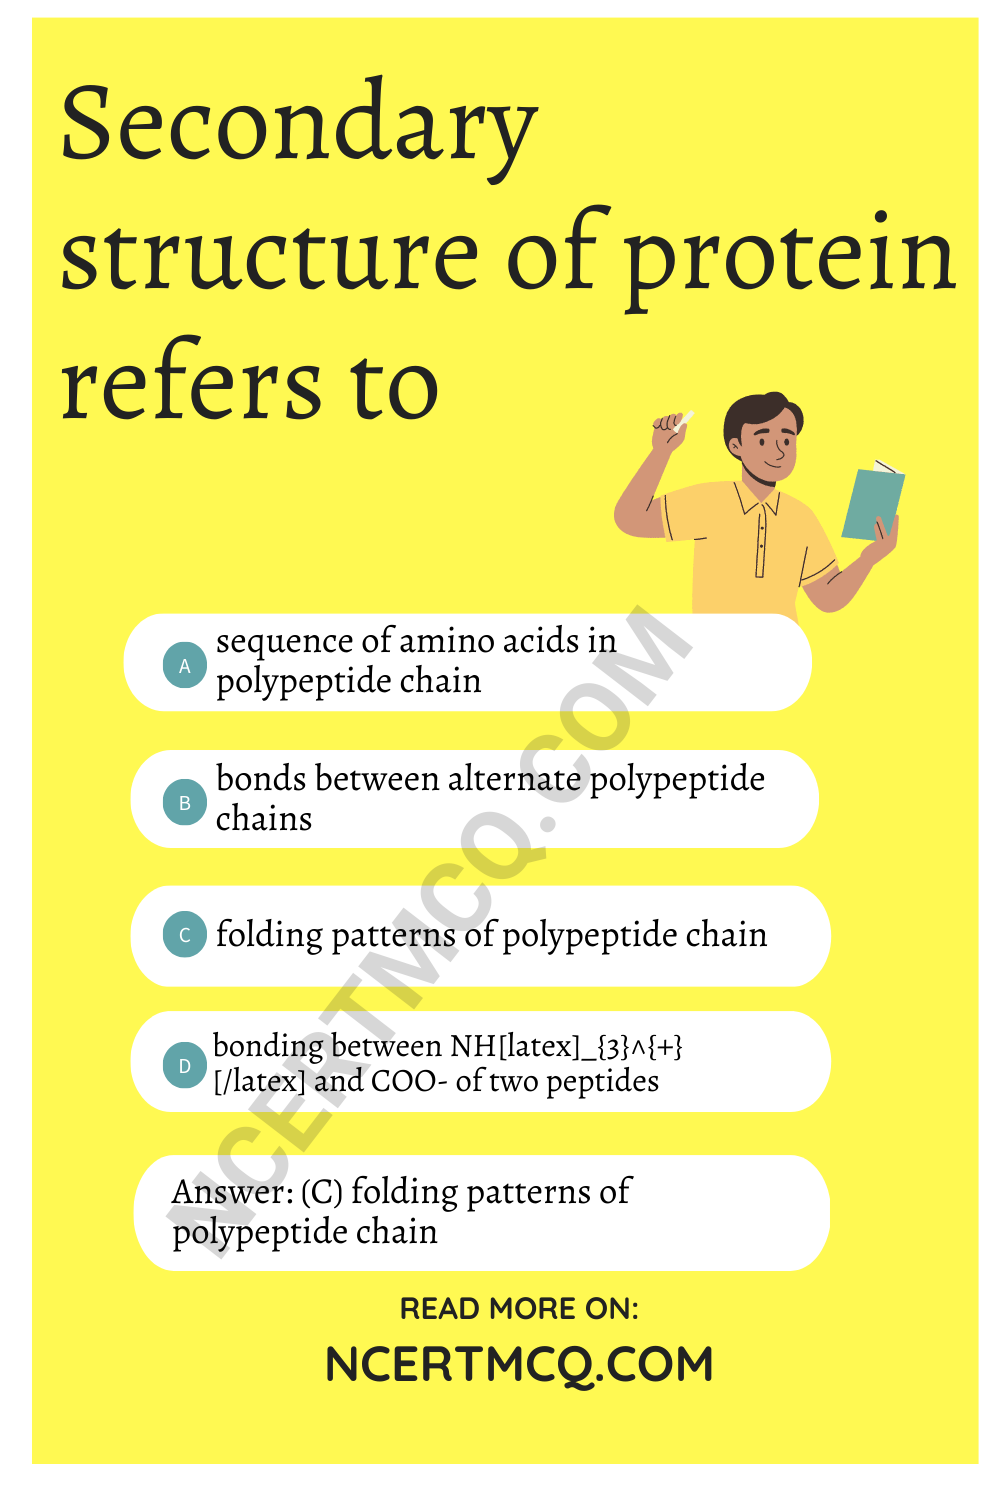 Secondary structure of protein refers to